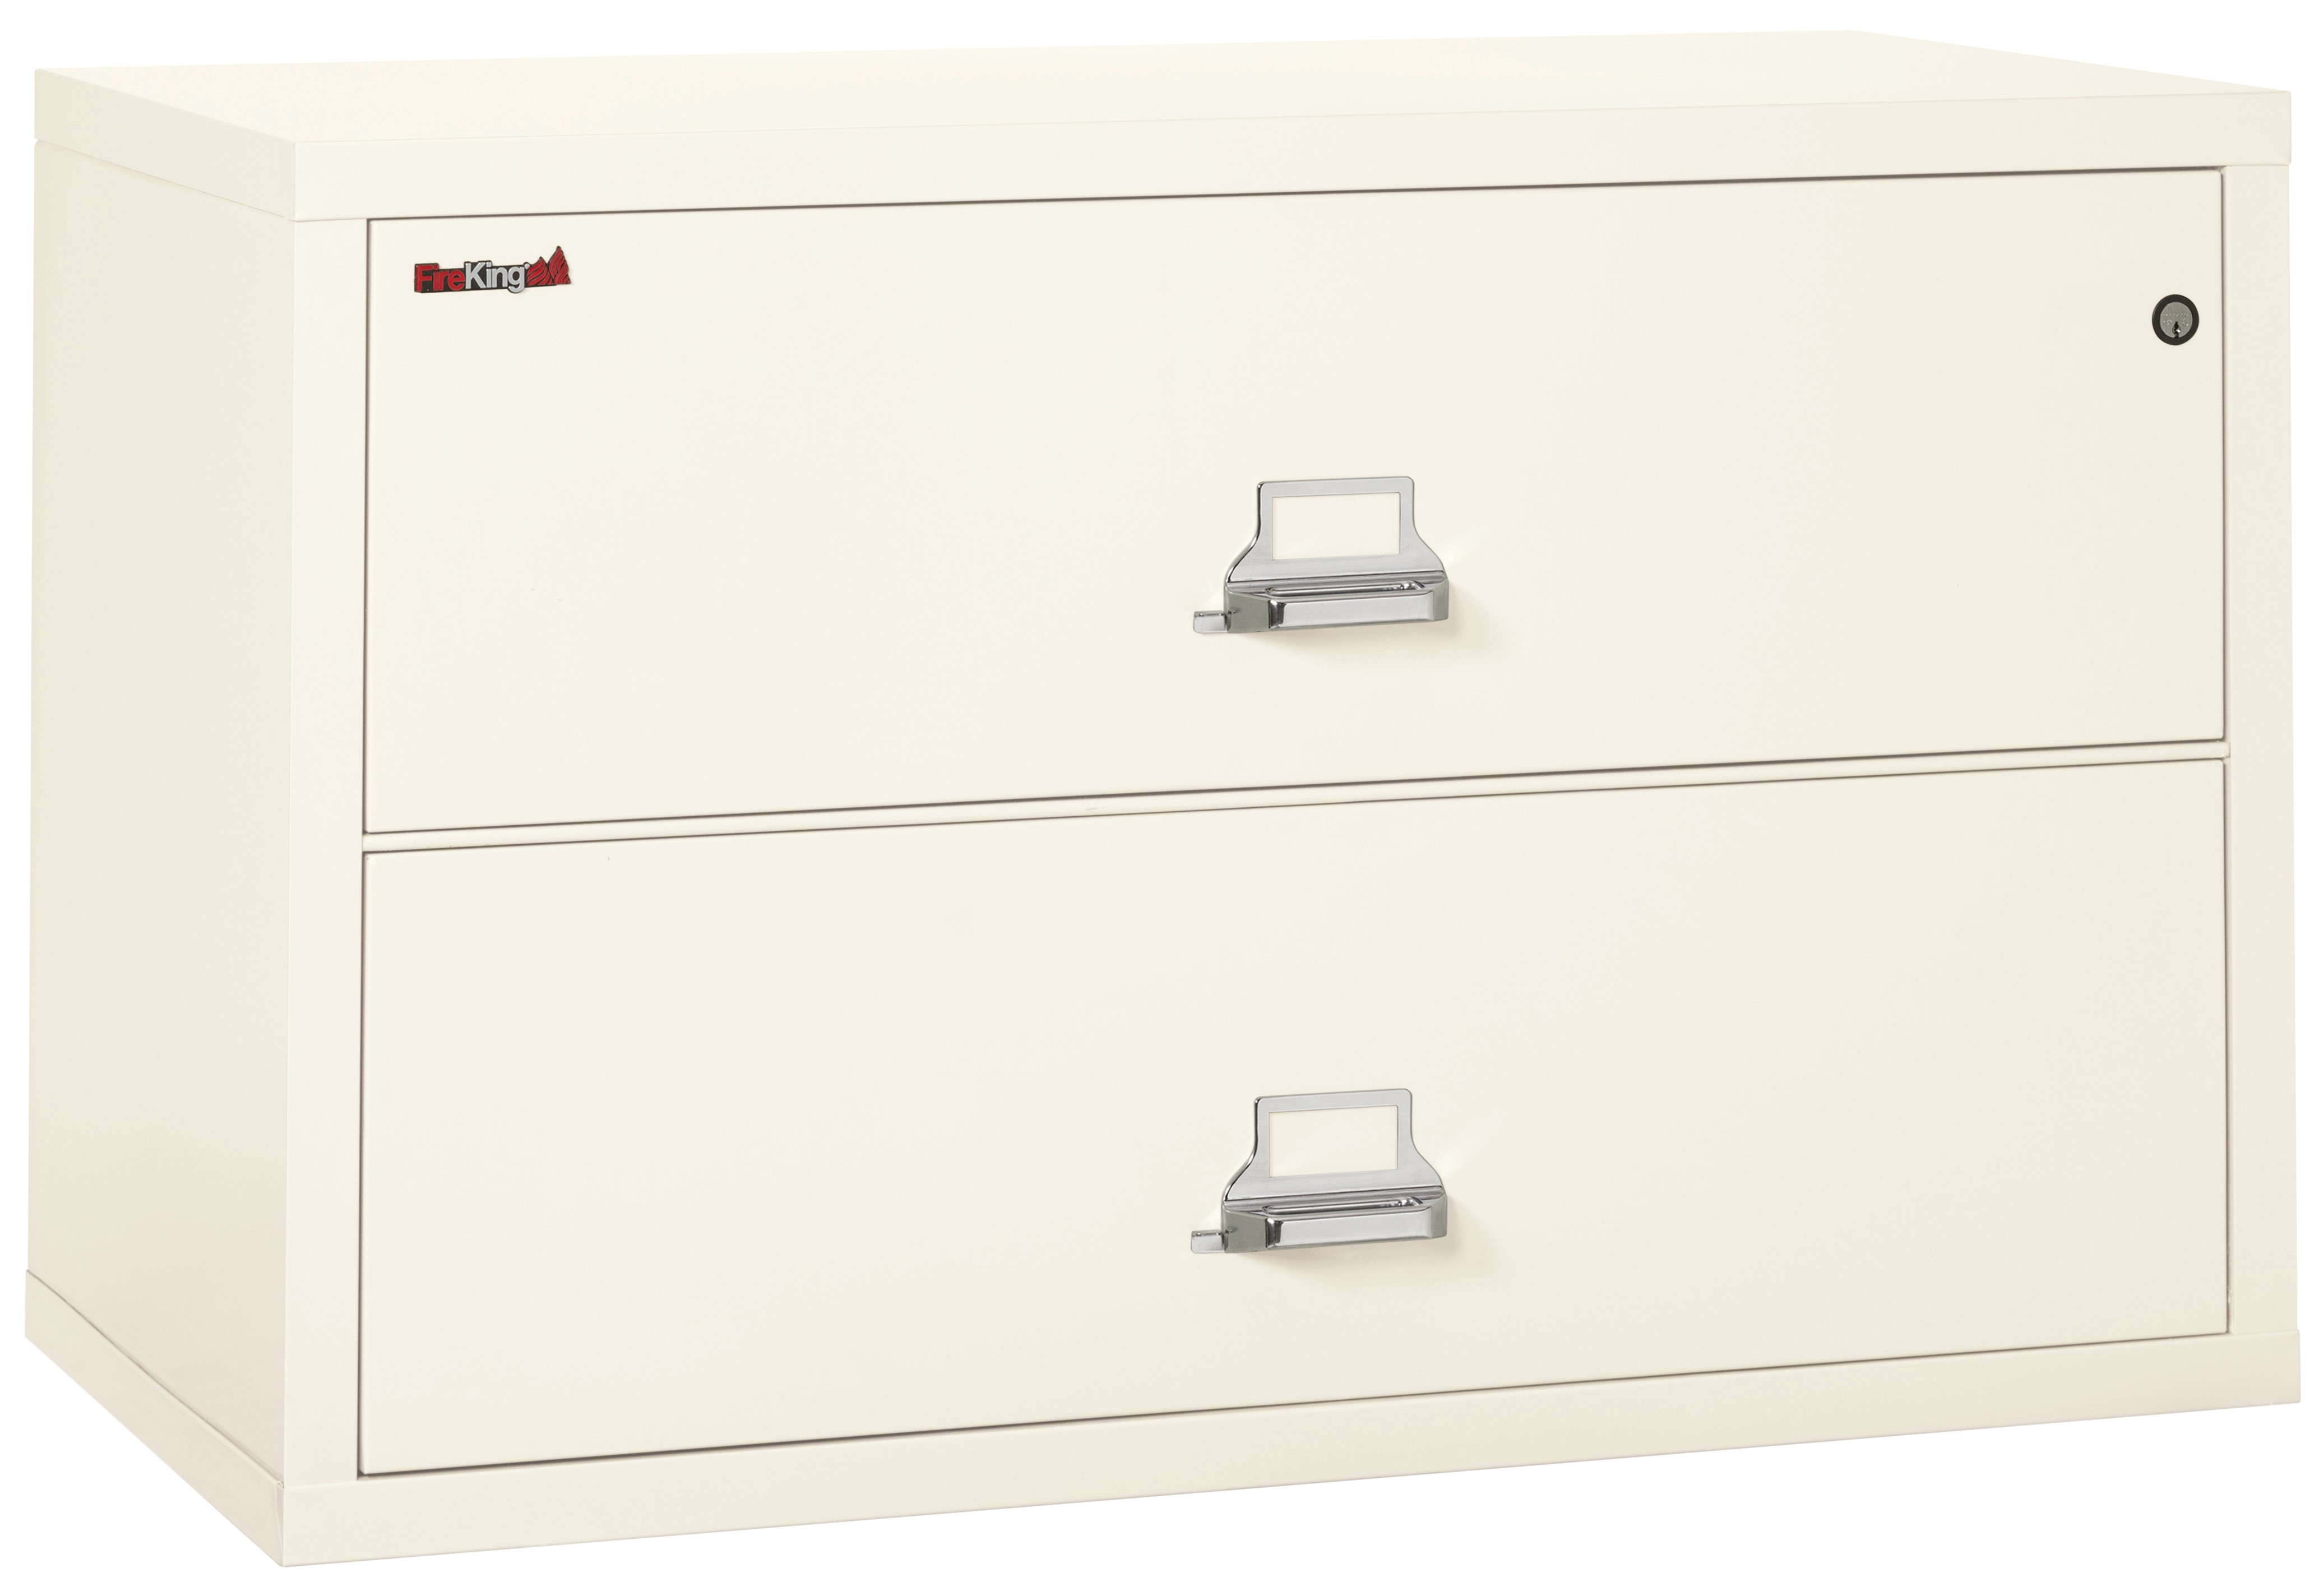 Fireking 2 Drawer 44" wide Classic Lateral fireproof File Cabinet-Ivory White - image 1 of 1